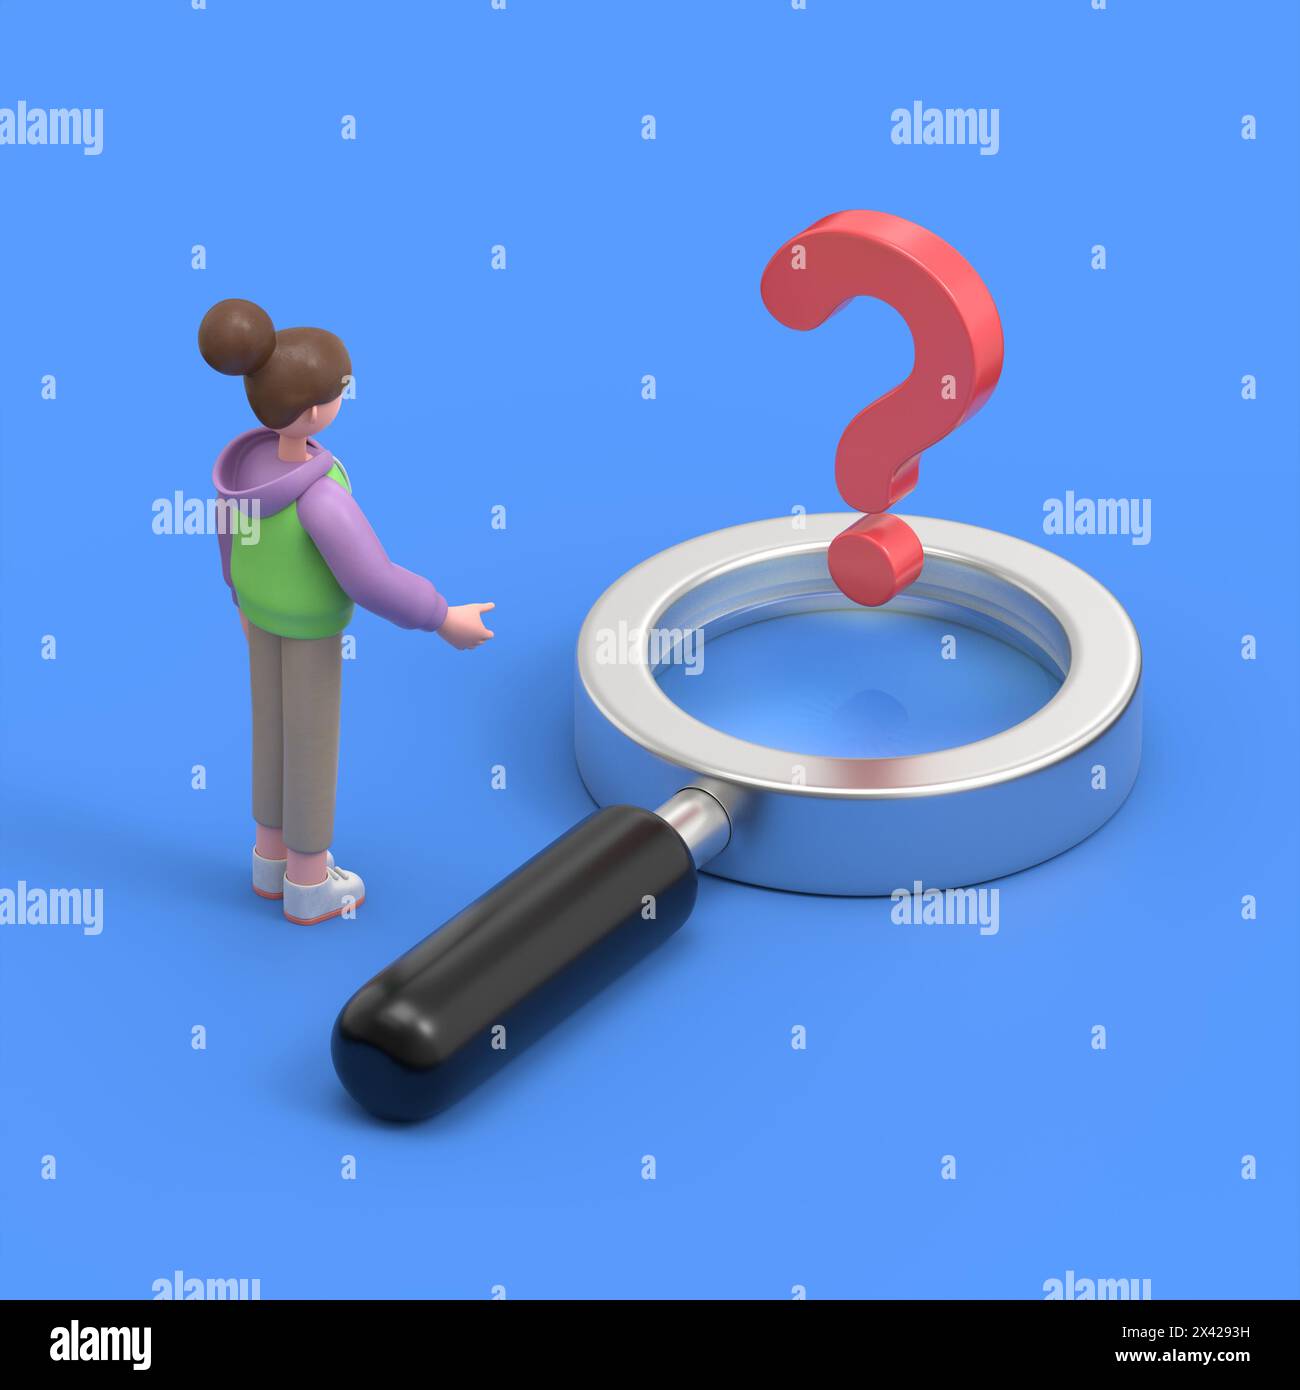 isometric 3D illustration on a blue background,3D illustration of Asian girl Renae stands in front of a question mark in a magnifying glass, looking f Stock Photo